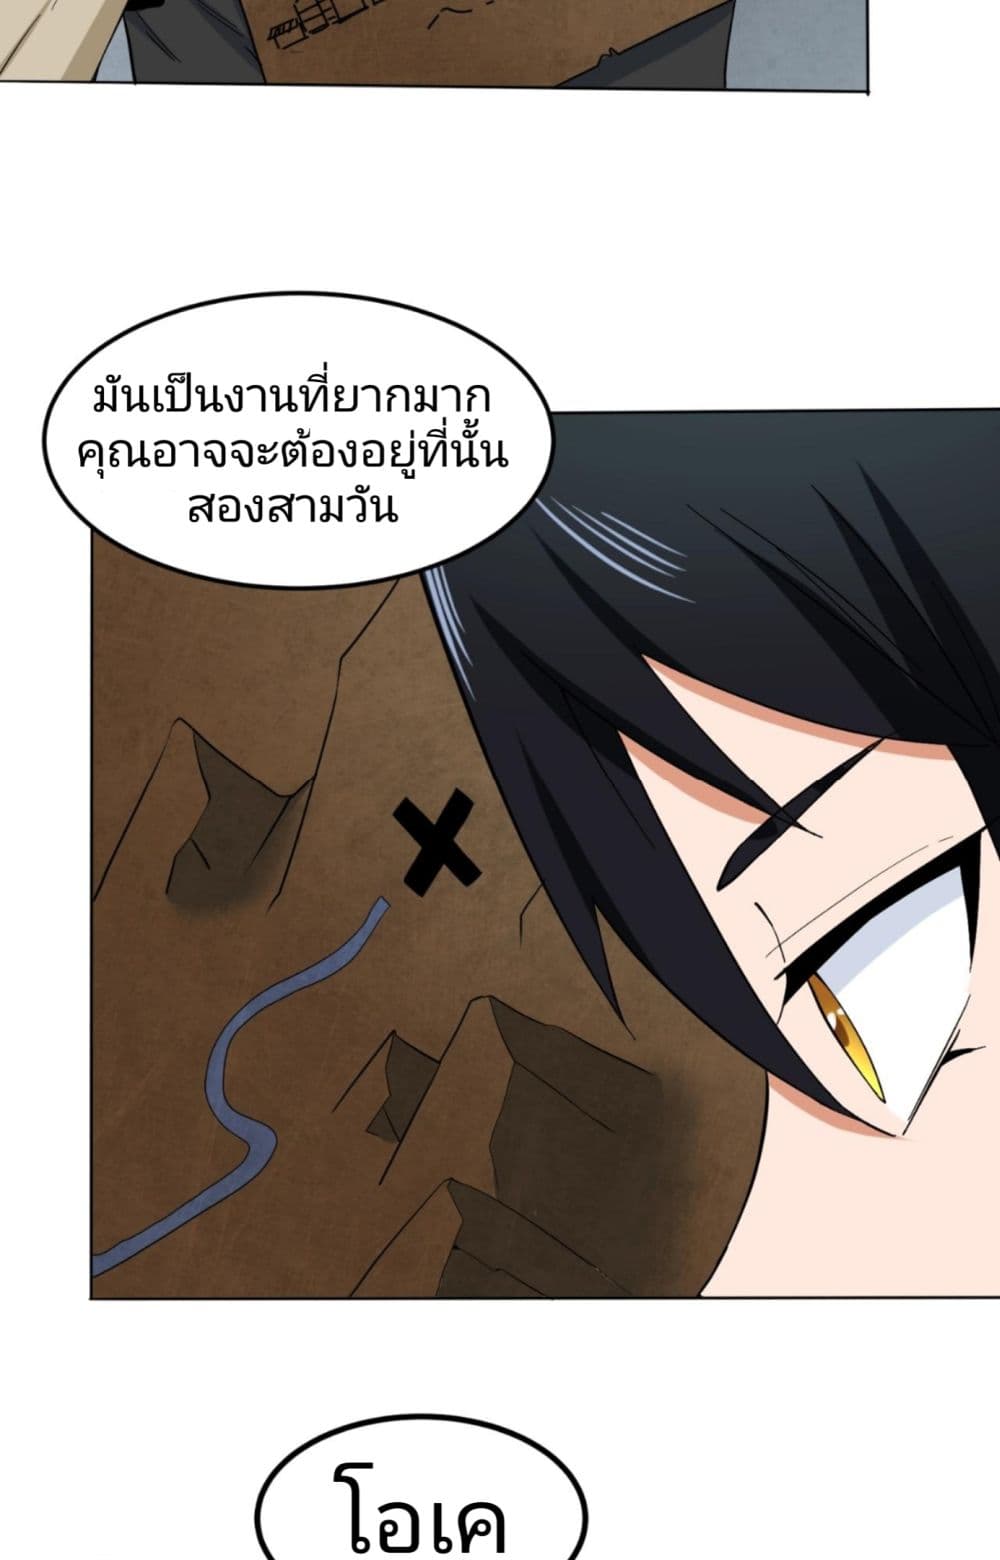 The Age of Ghost Spirits à¸à¸­à¸à¸à¸µà¹ 6 (27)